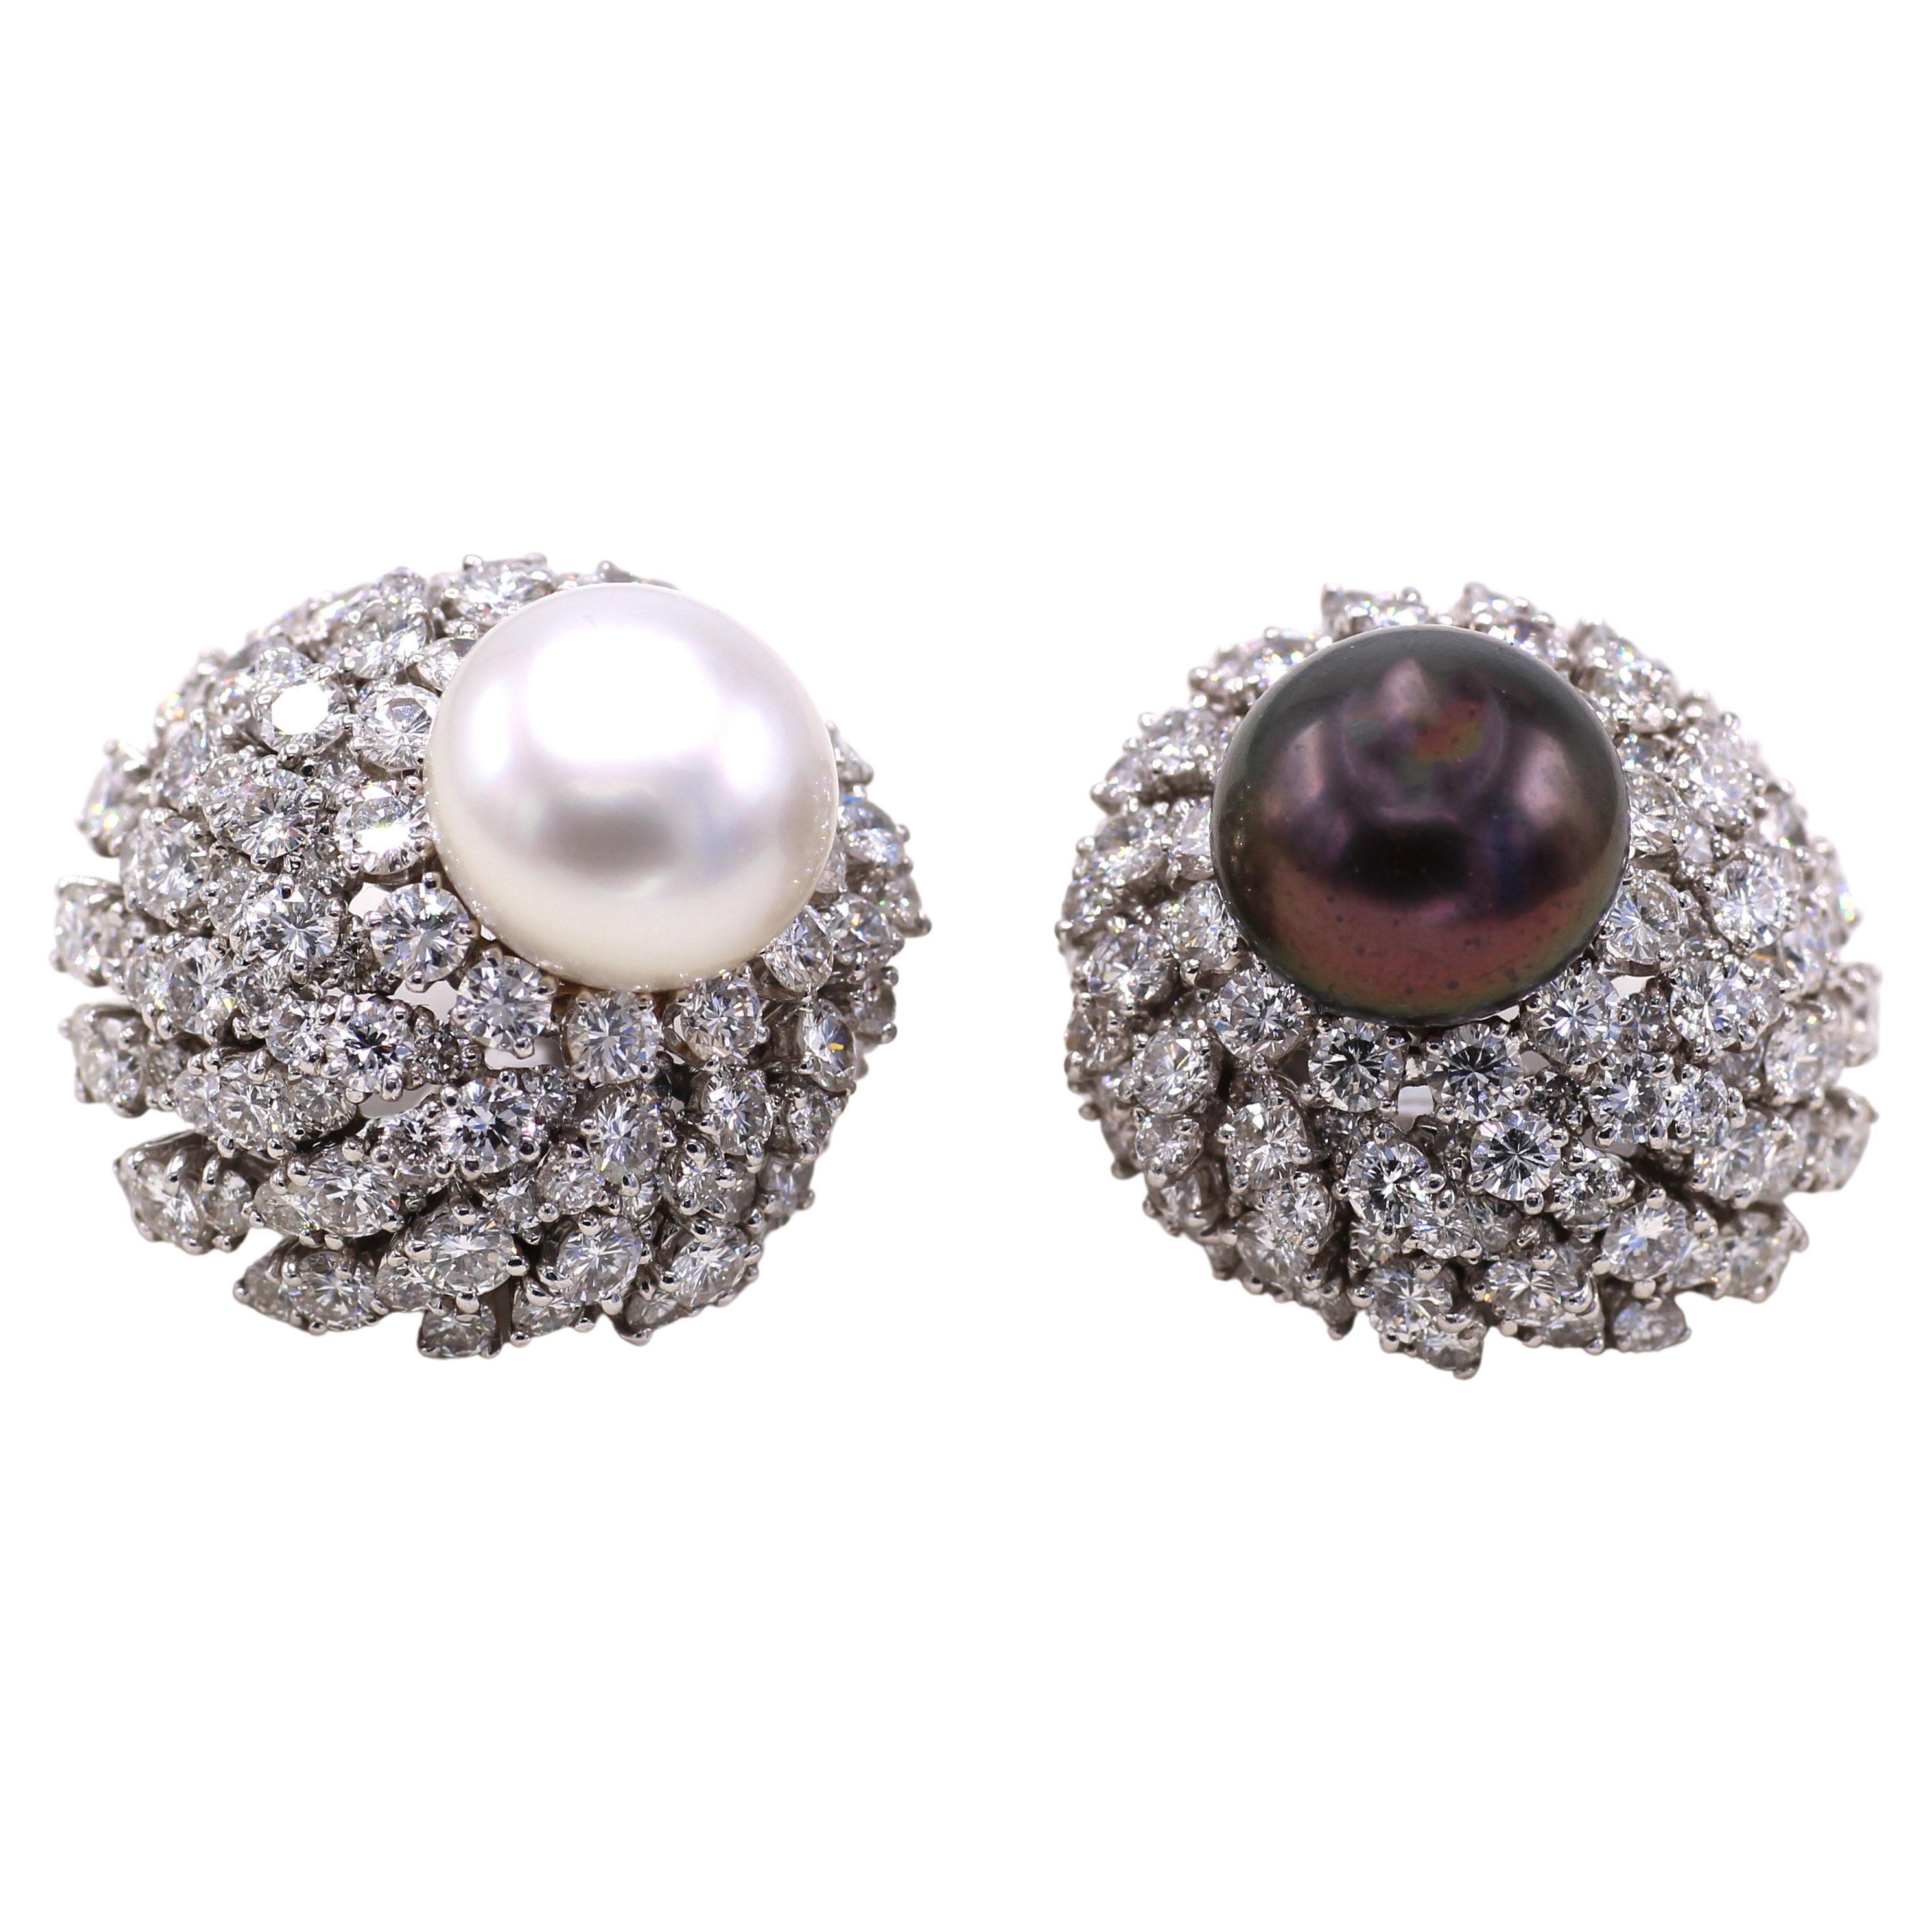 Stunning one of a kind 1960s ear clips by David Webb. Beautifully designed and amazingly handcrafted in platinum, these bold earrings in a bombe design are set with layers of perfectly matched white bright and sparkly round brilliant cut diamonds.